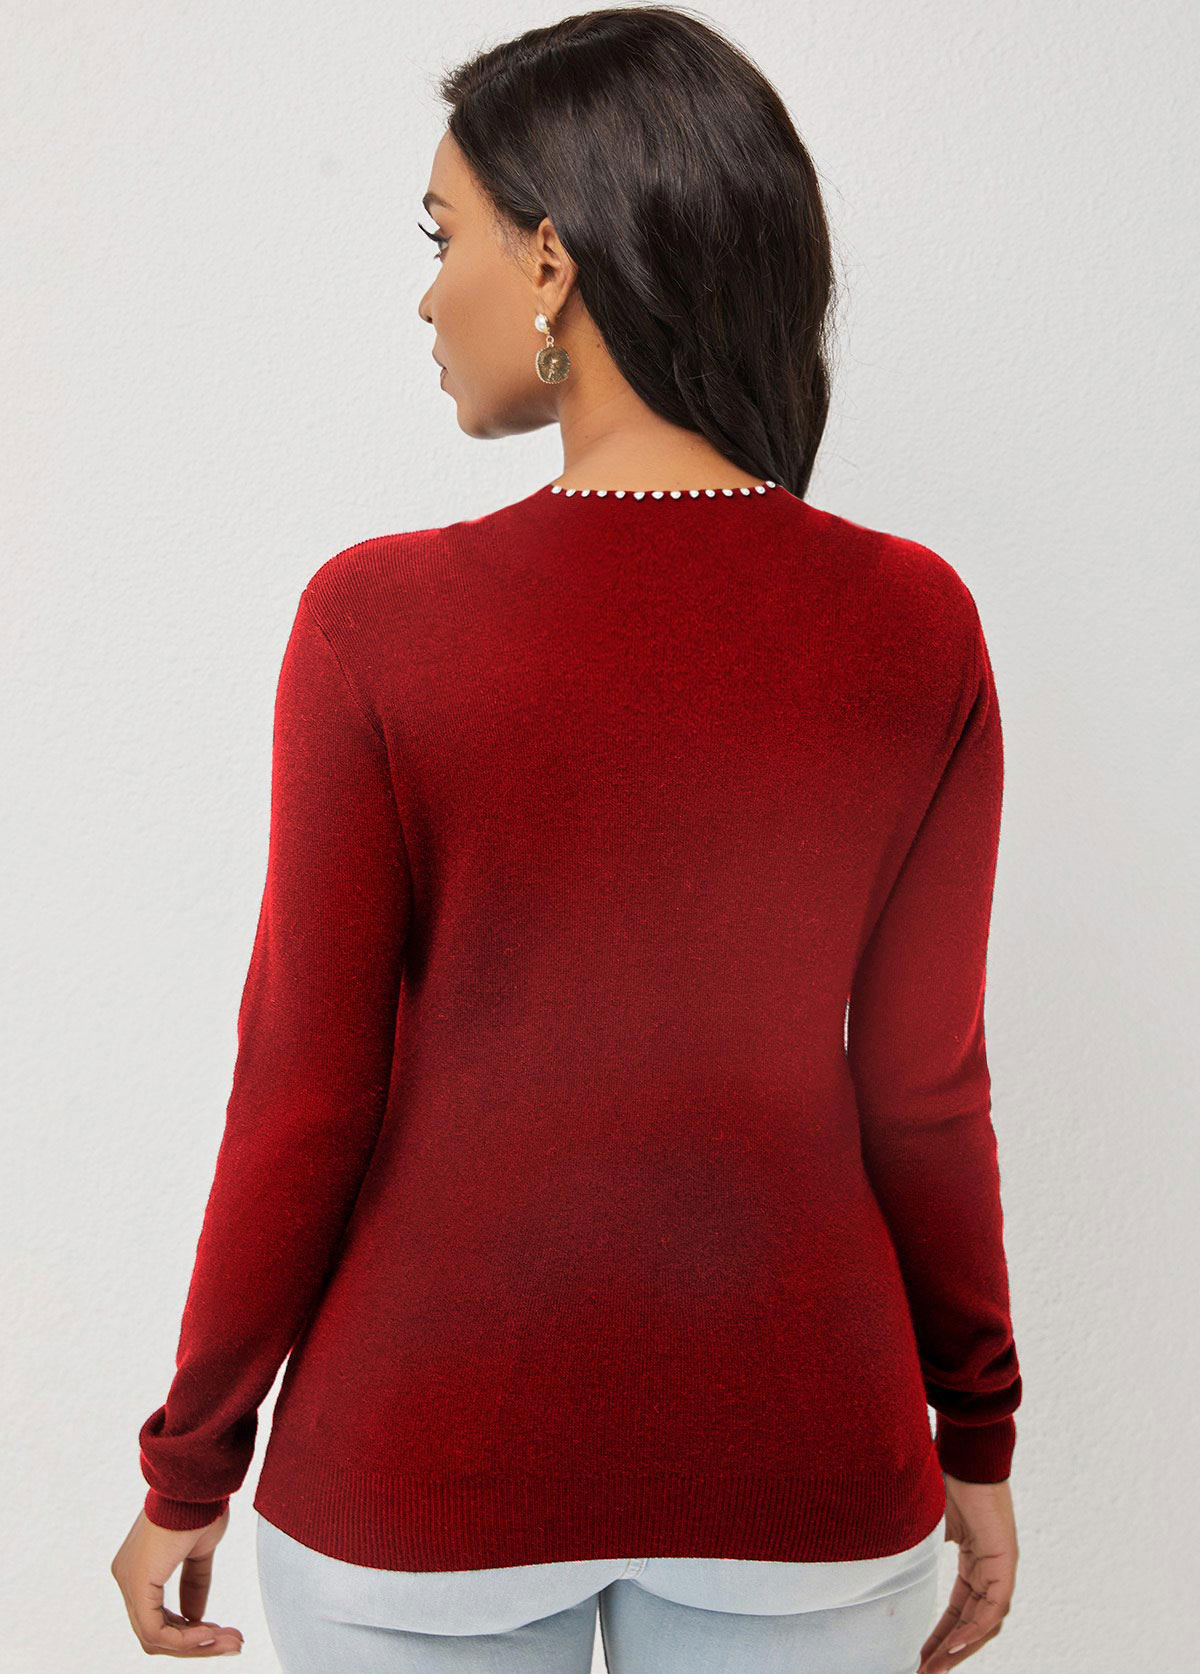 Wine Red Pearl Detail Keyhole Neckline Sweater